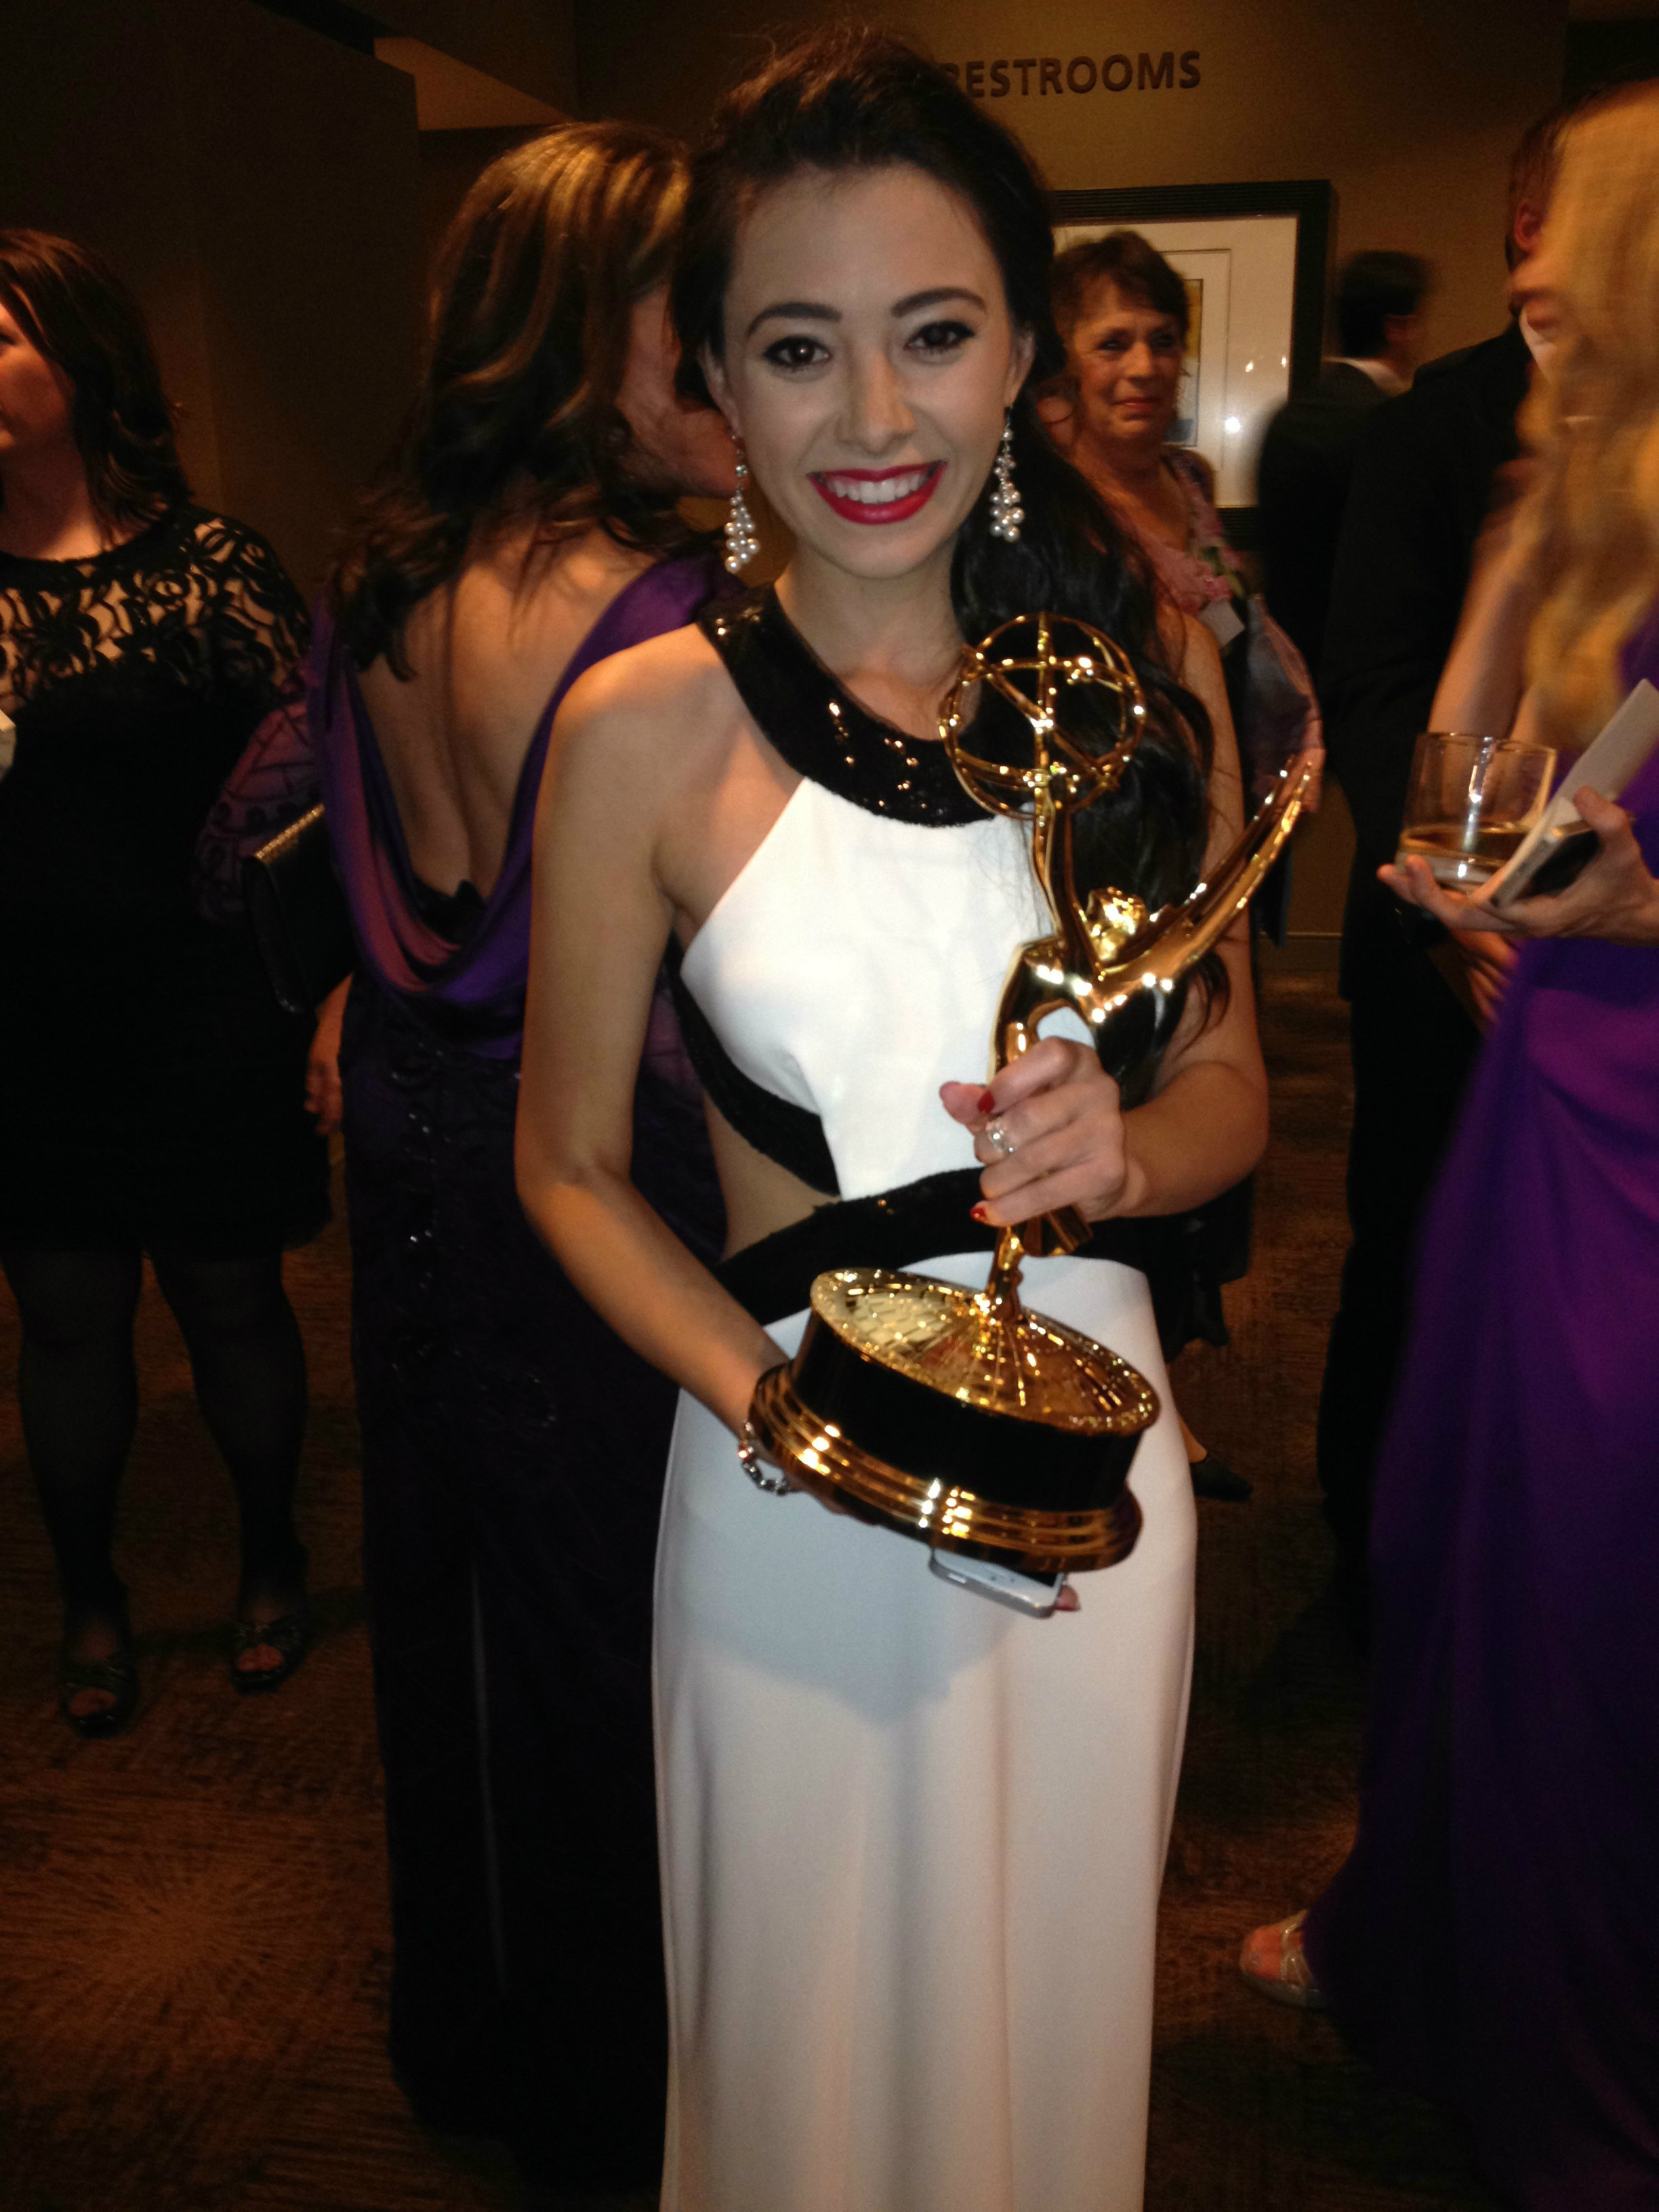 Hayley wins at the 2014 Daytime Emmy Awards